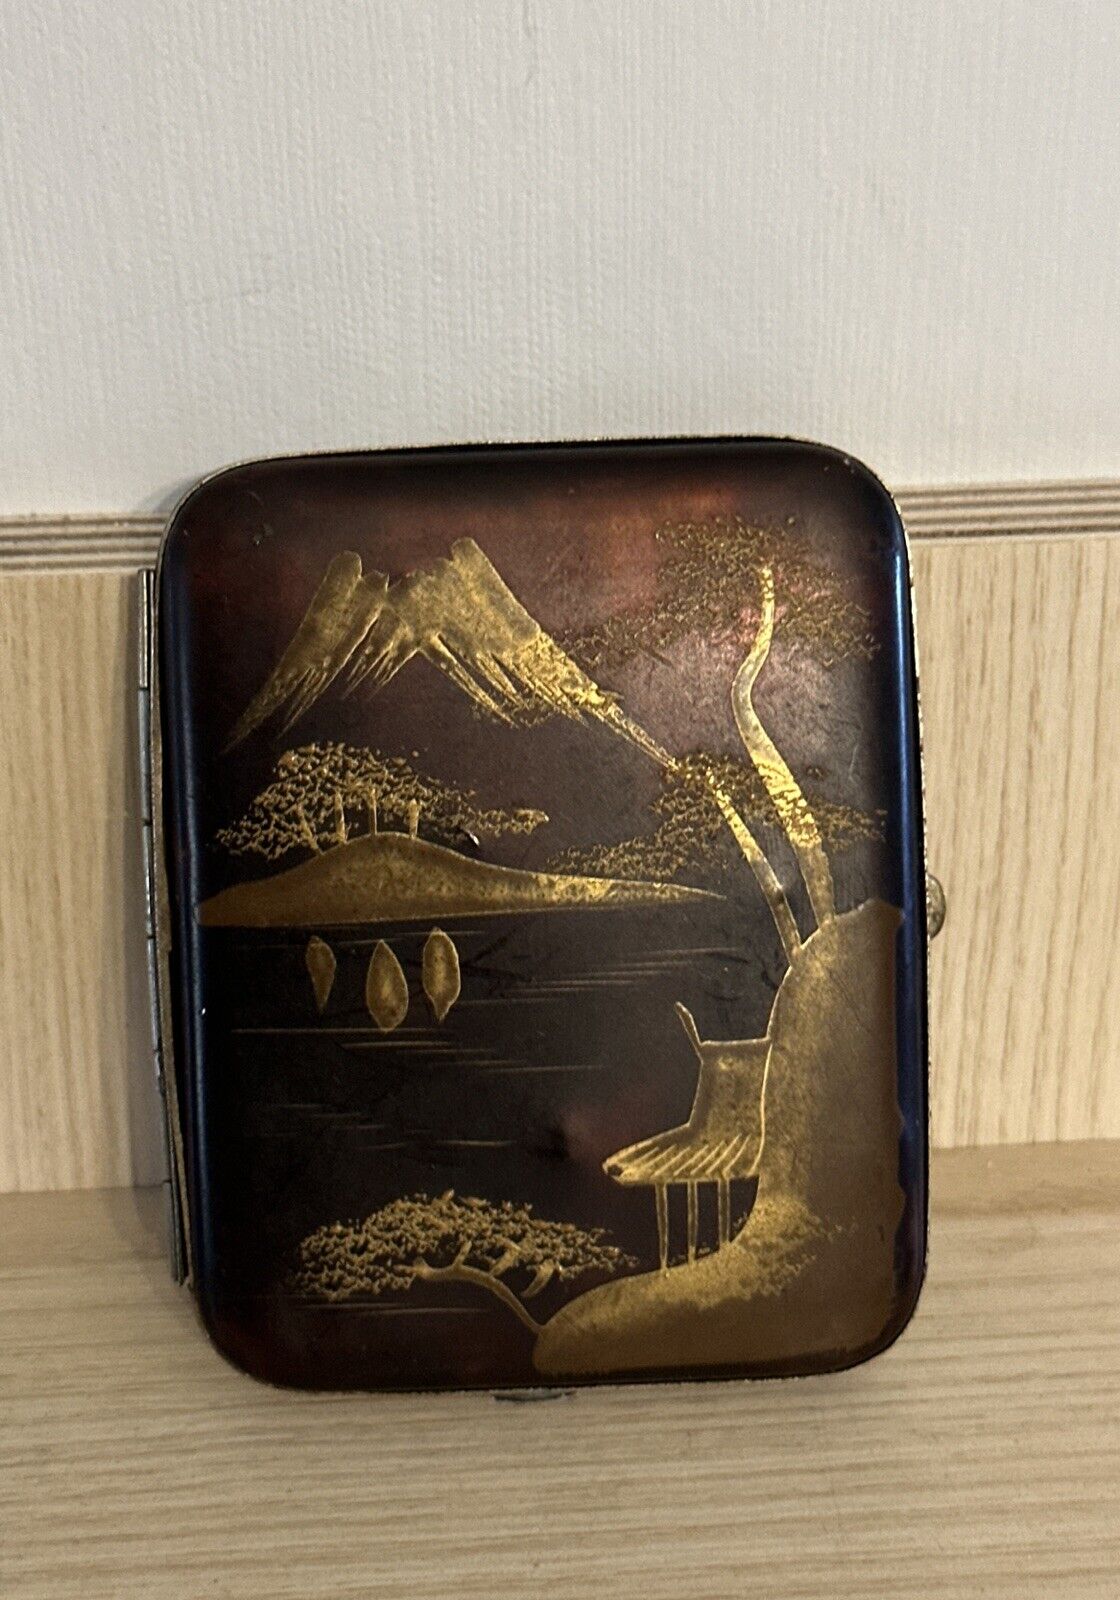 Vintage Japanese Hard Cigarette Case Mt. Fuji Seascape Hand Painted Gold Inlay